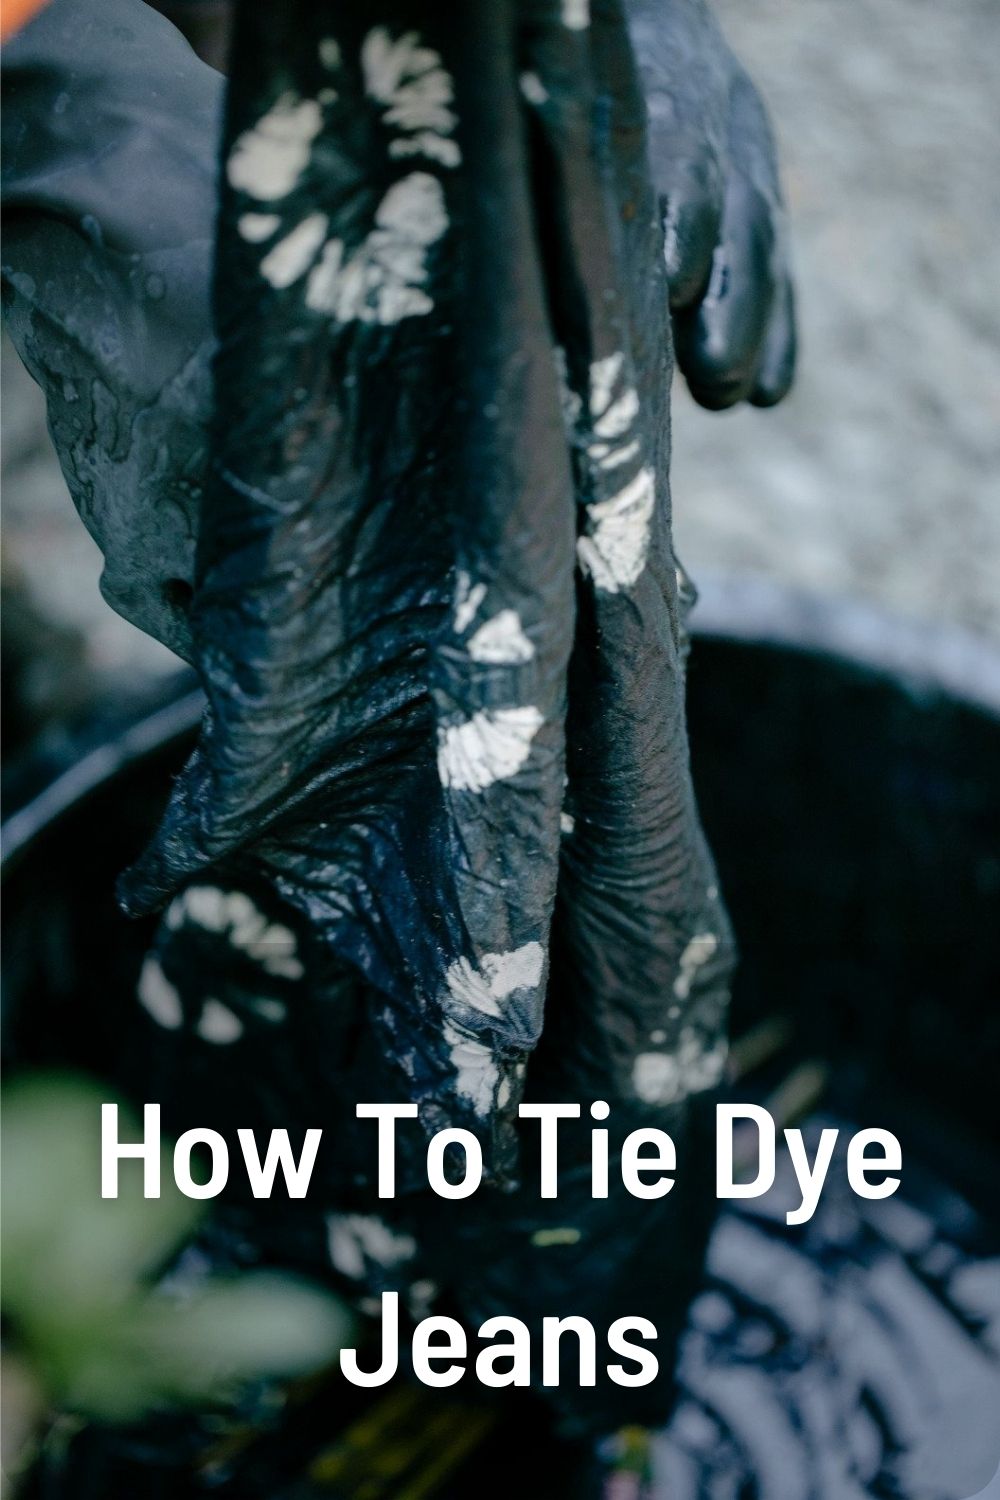 How To Tie Dye Jeans? (Complete Guide)